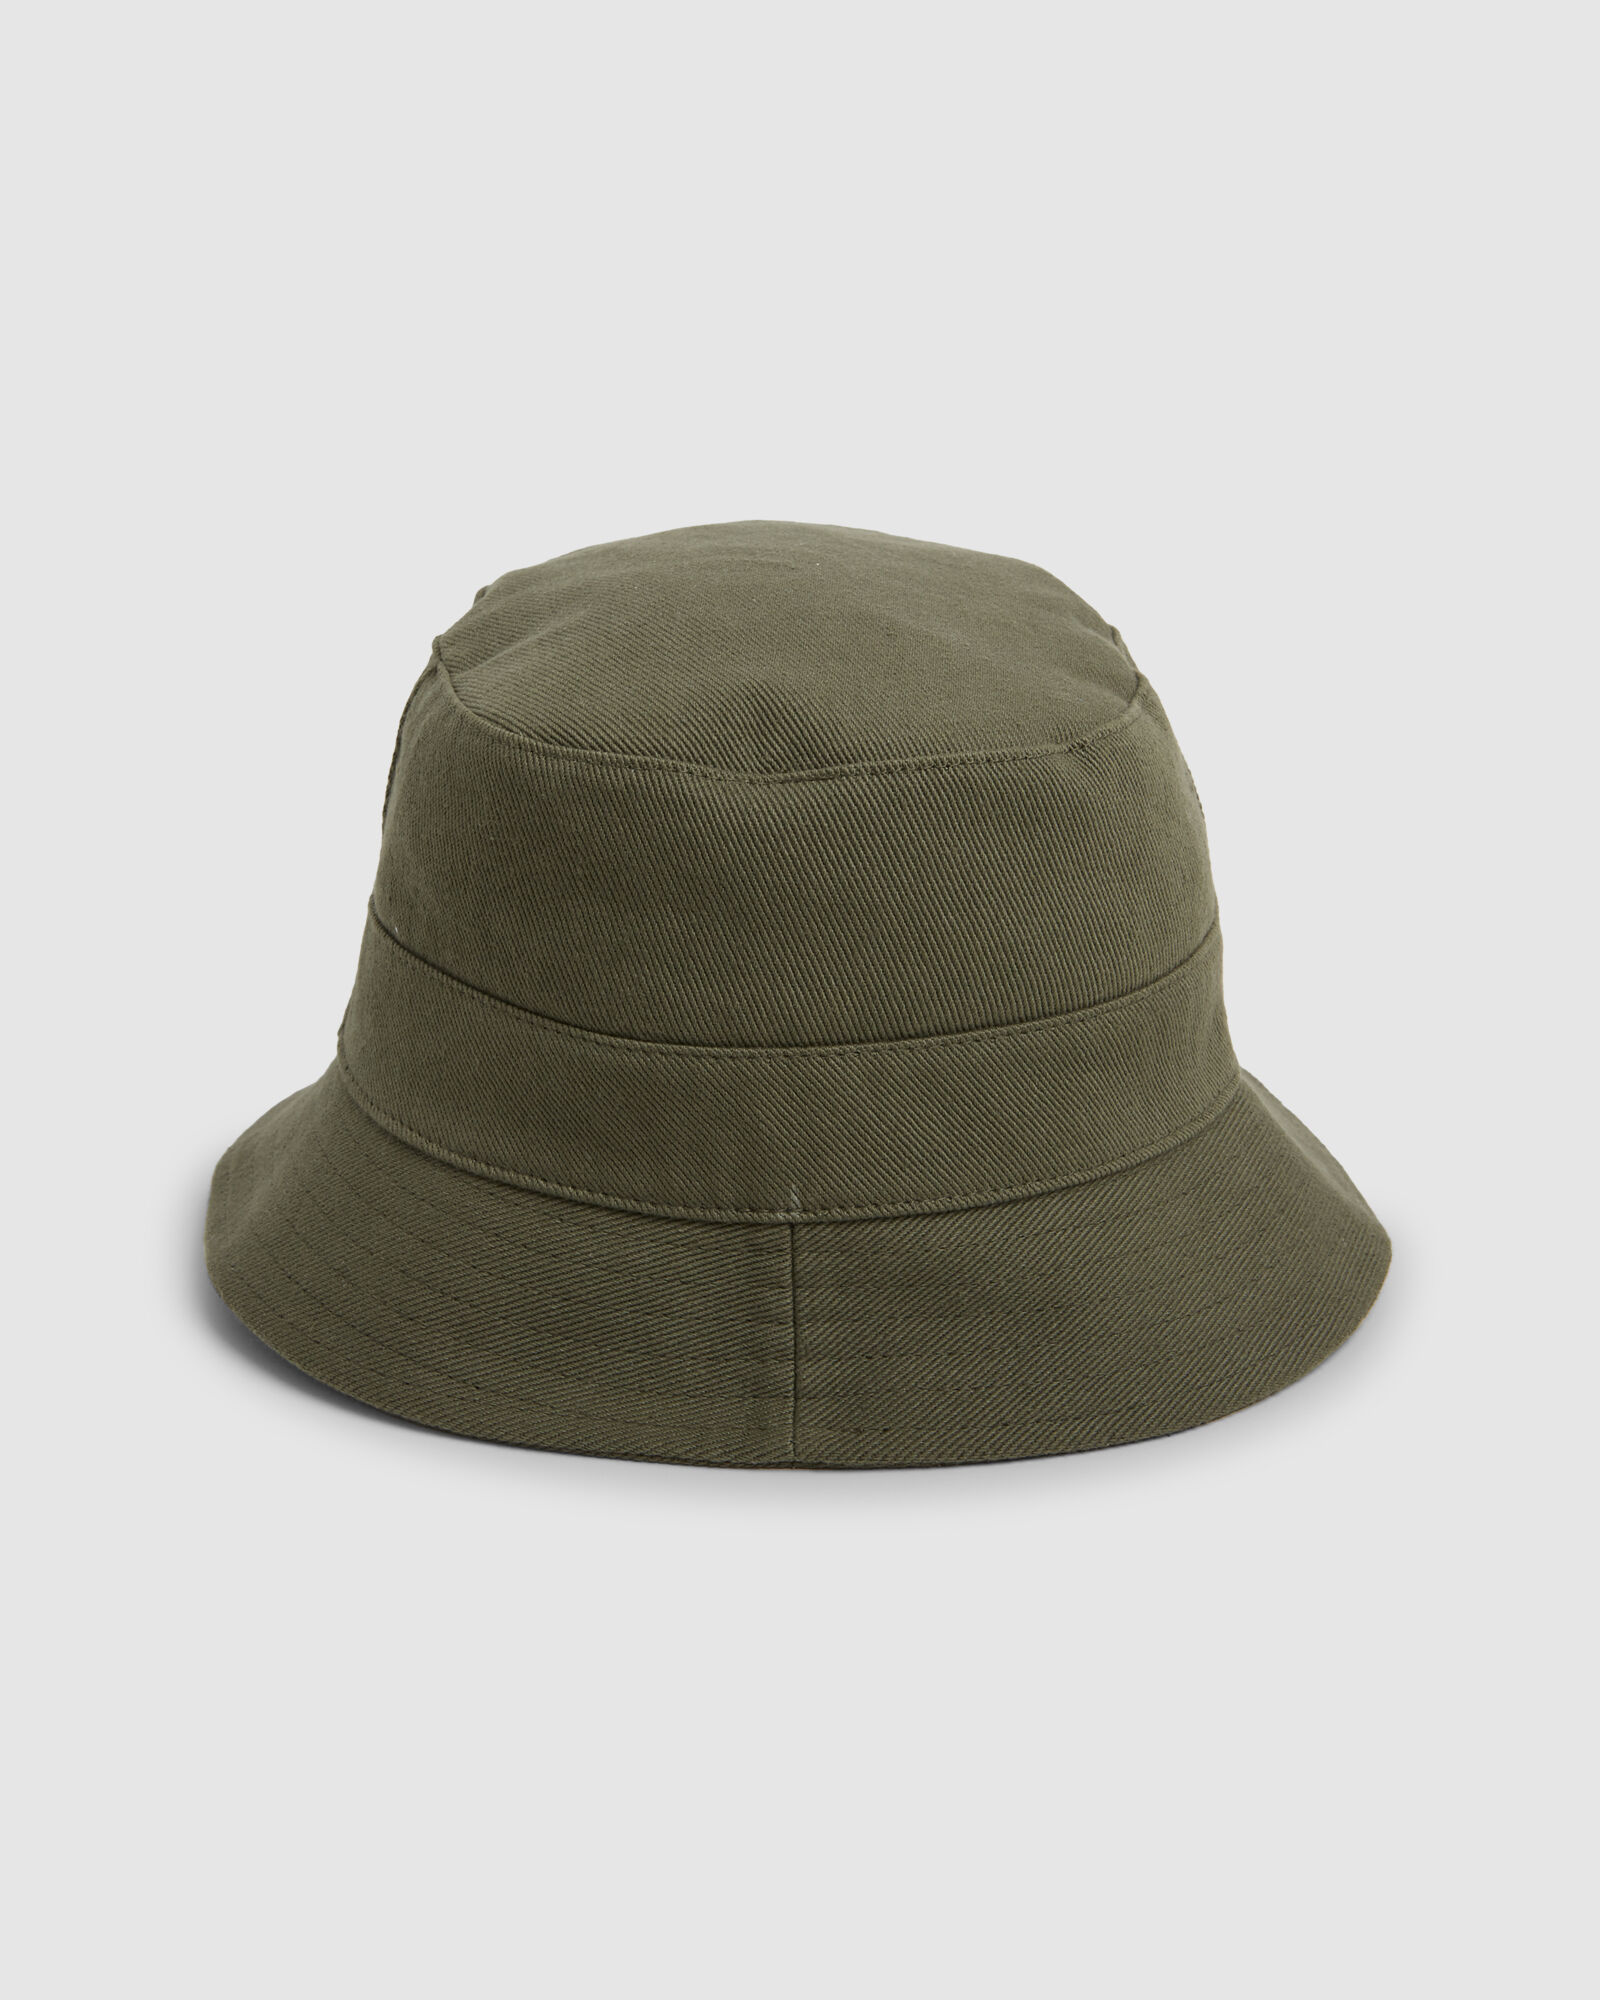 Womens Benny Bucket Hat 6 by ELEMENT | Amazon Surf